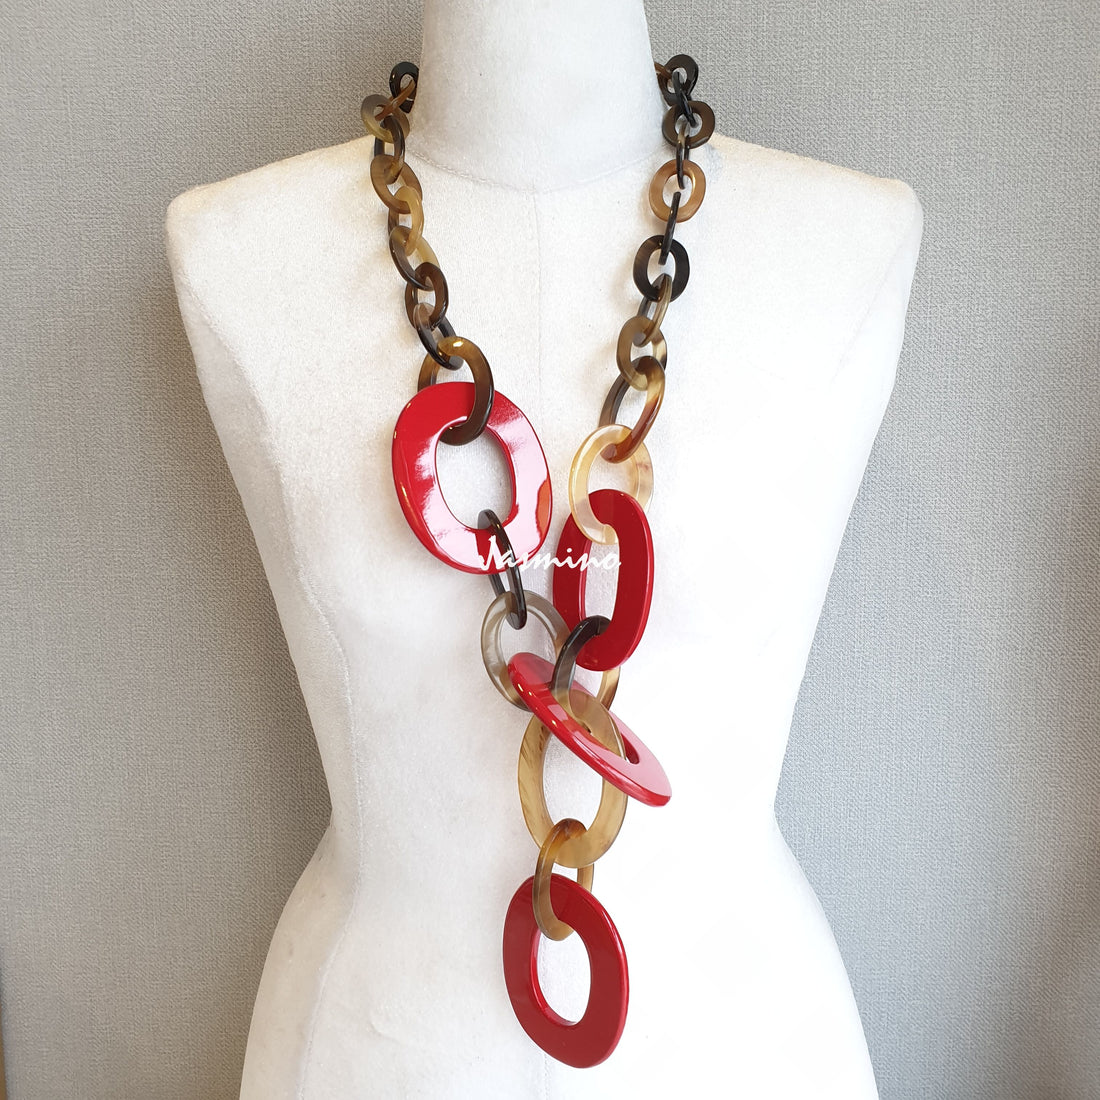 A red wide chain necklace features natural buffalo horn worn by a mannequin